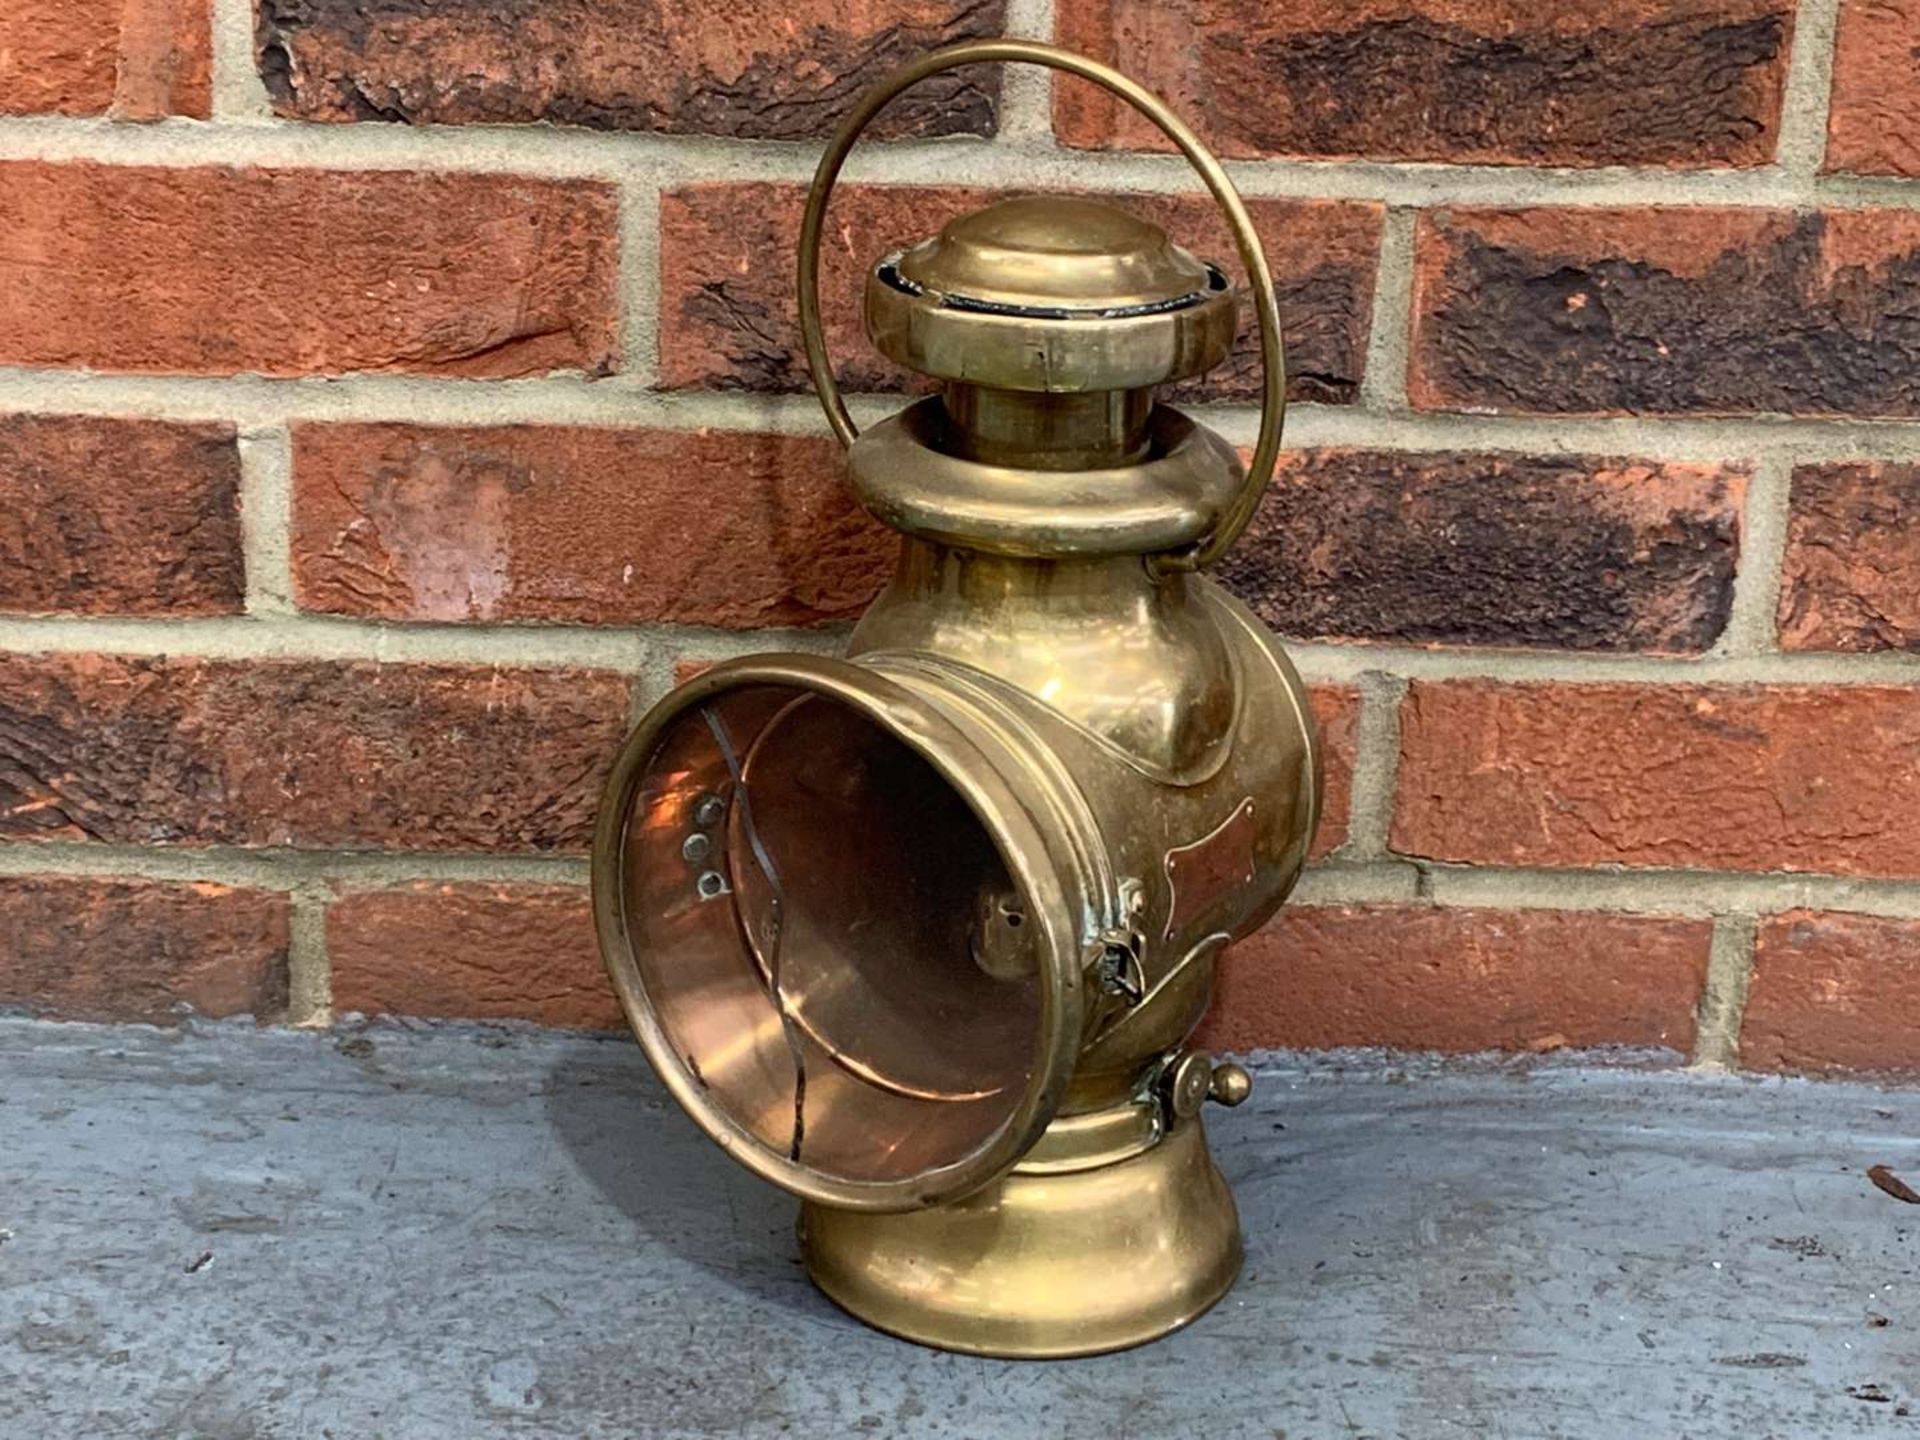 Brass Lucas “King of The Road” Lamp